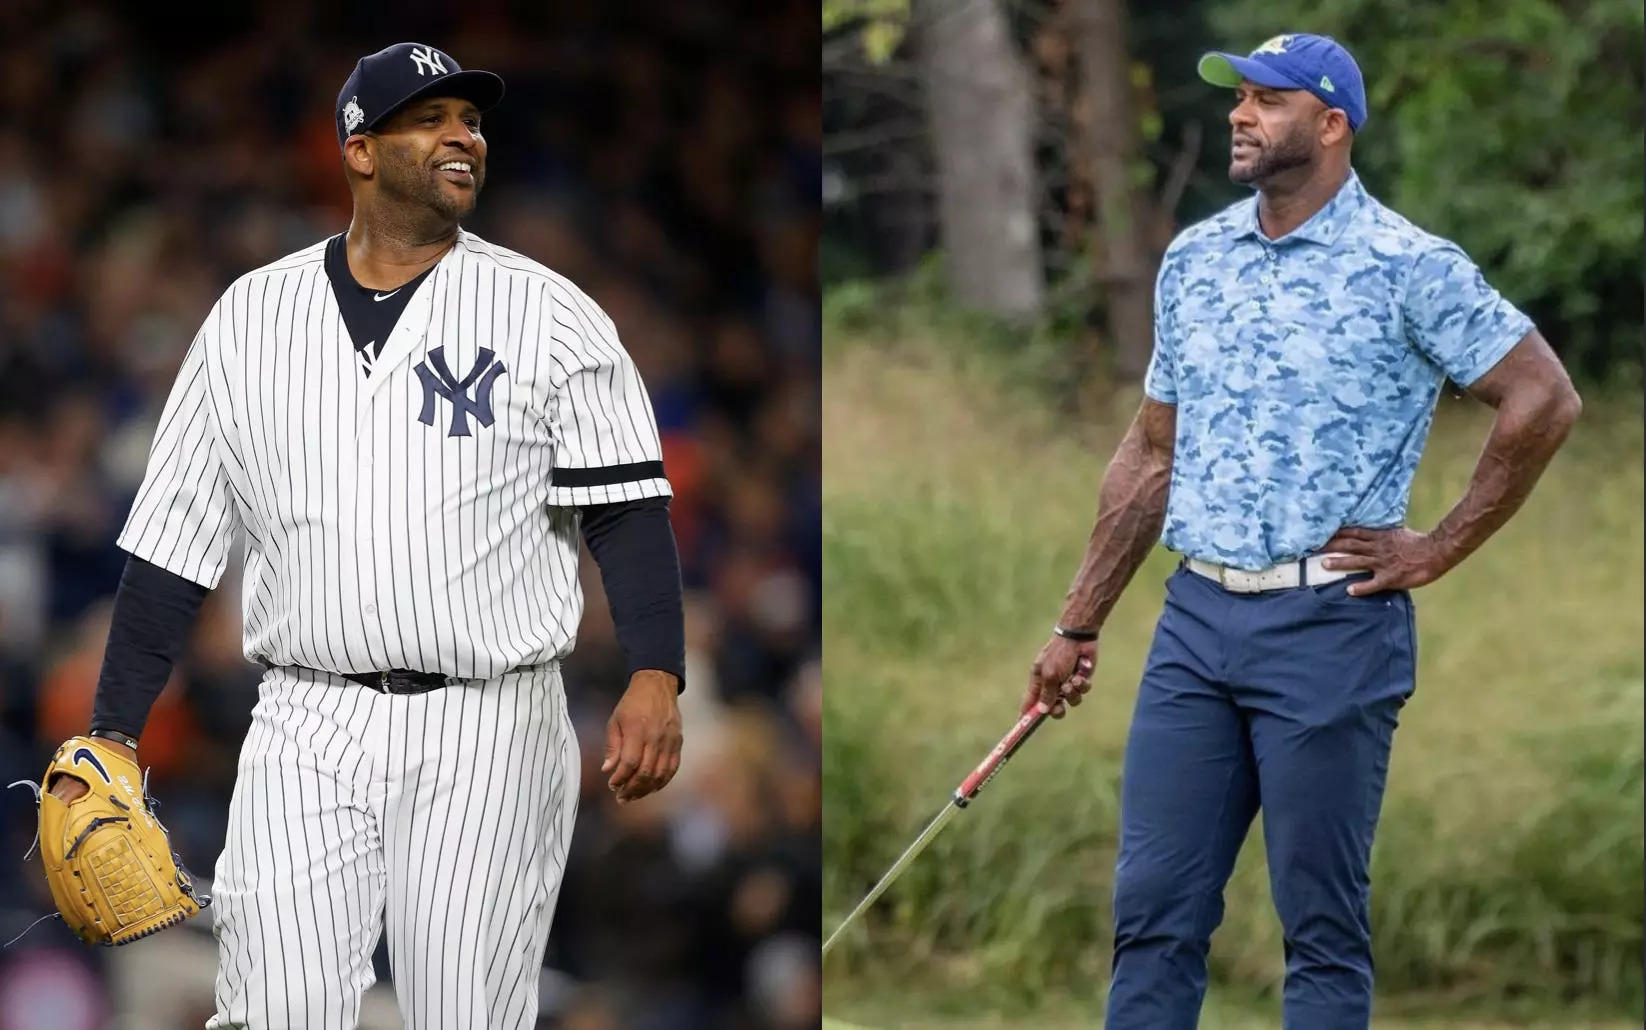 Ex Yankees star CC Sabathia: Money advice he'd give his younger self